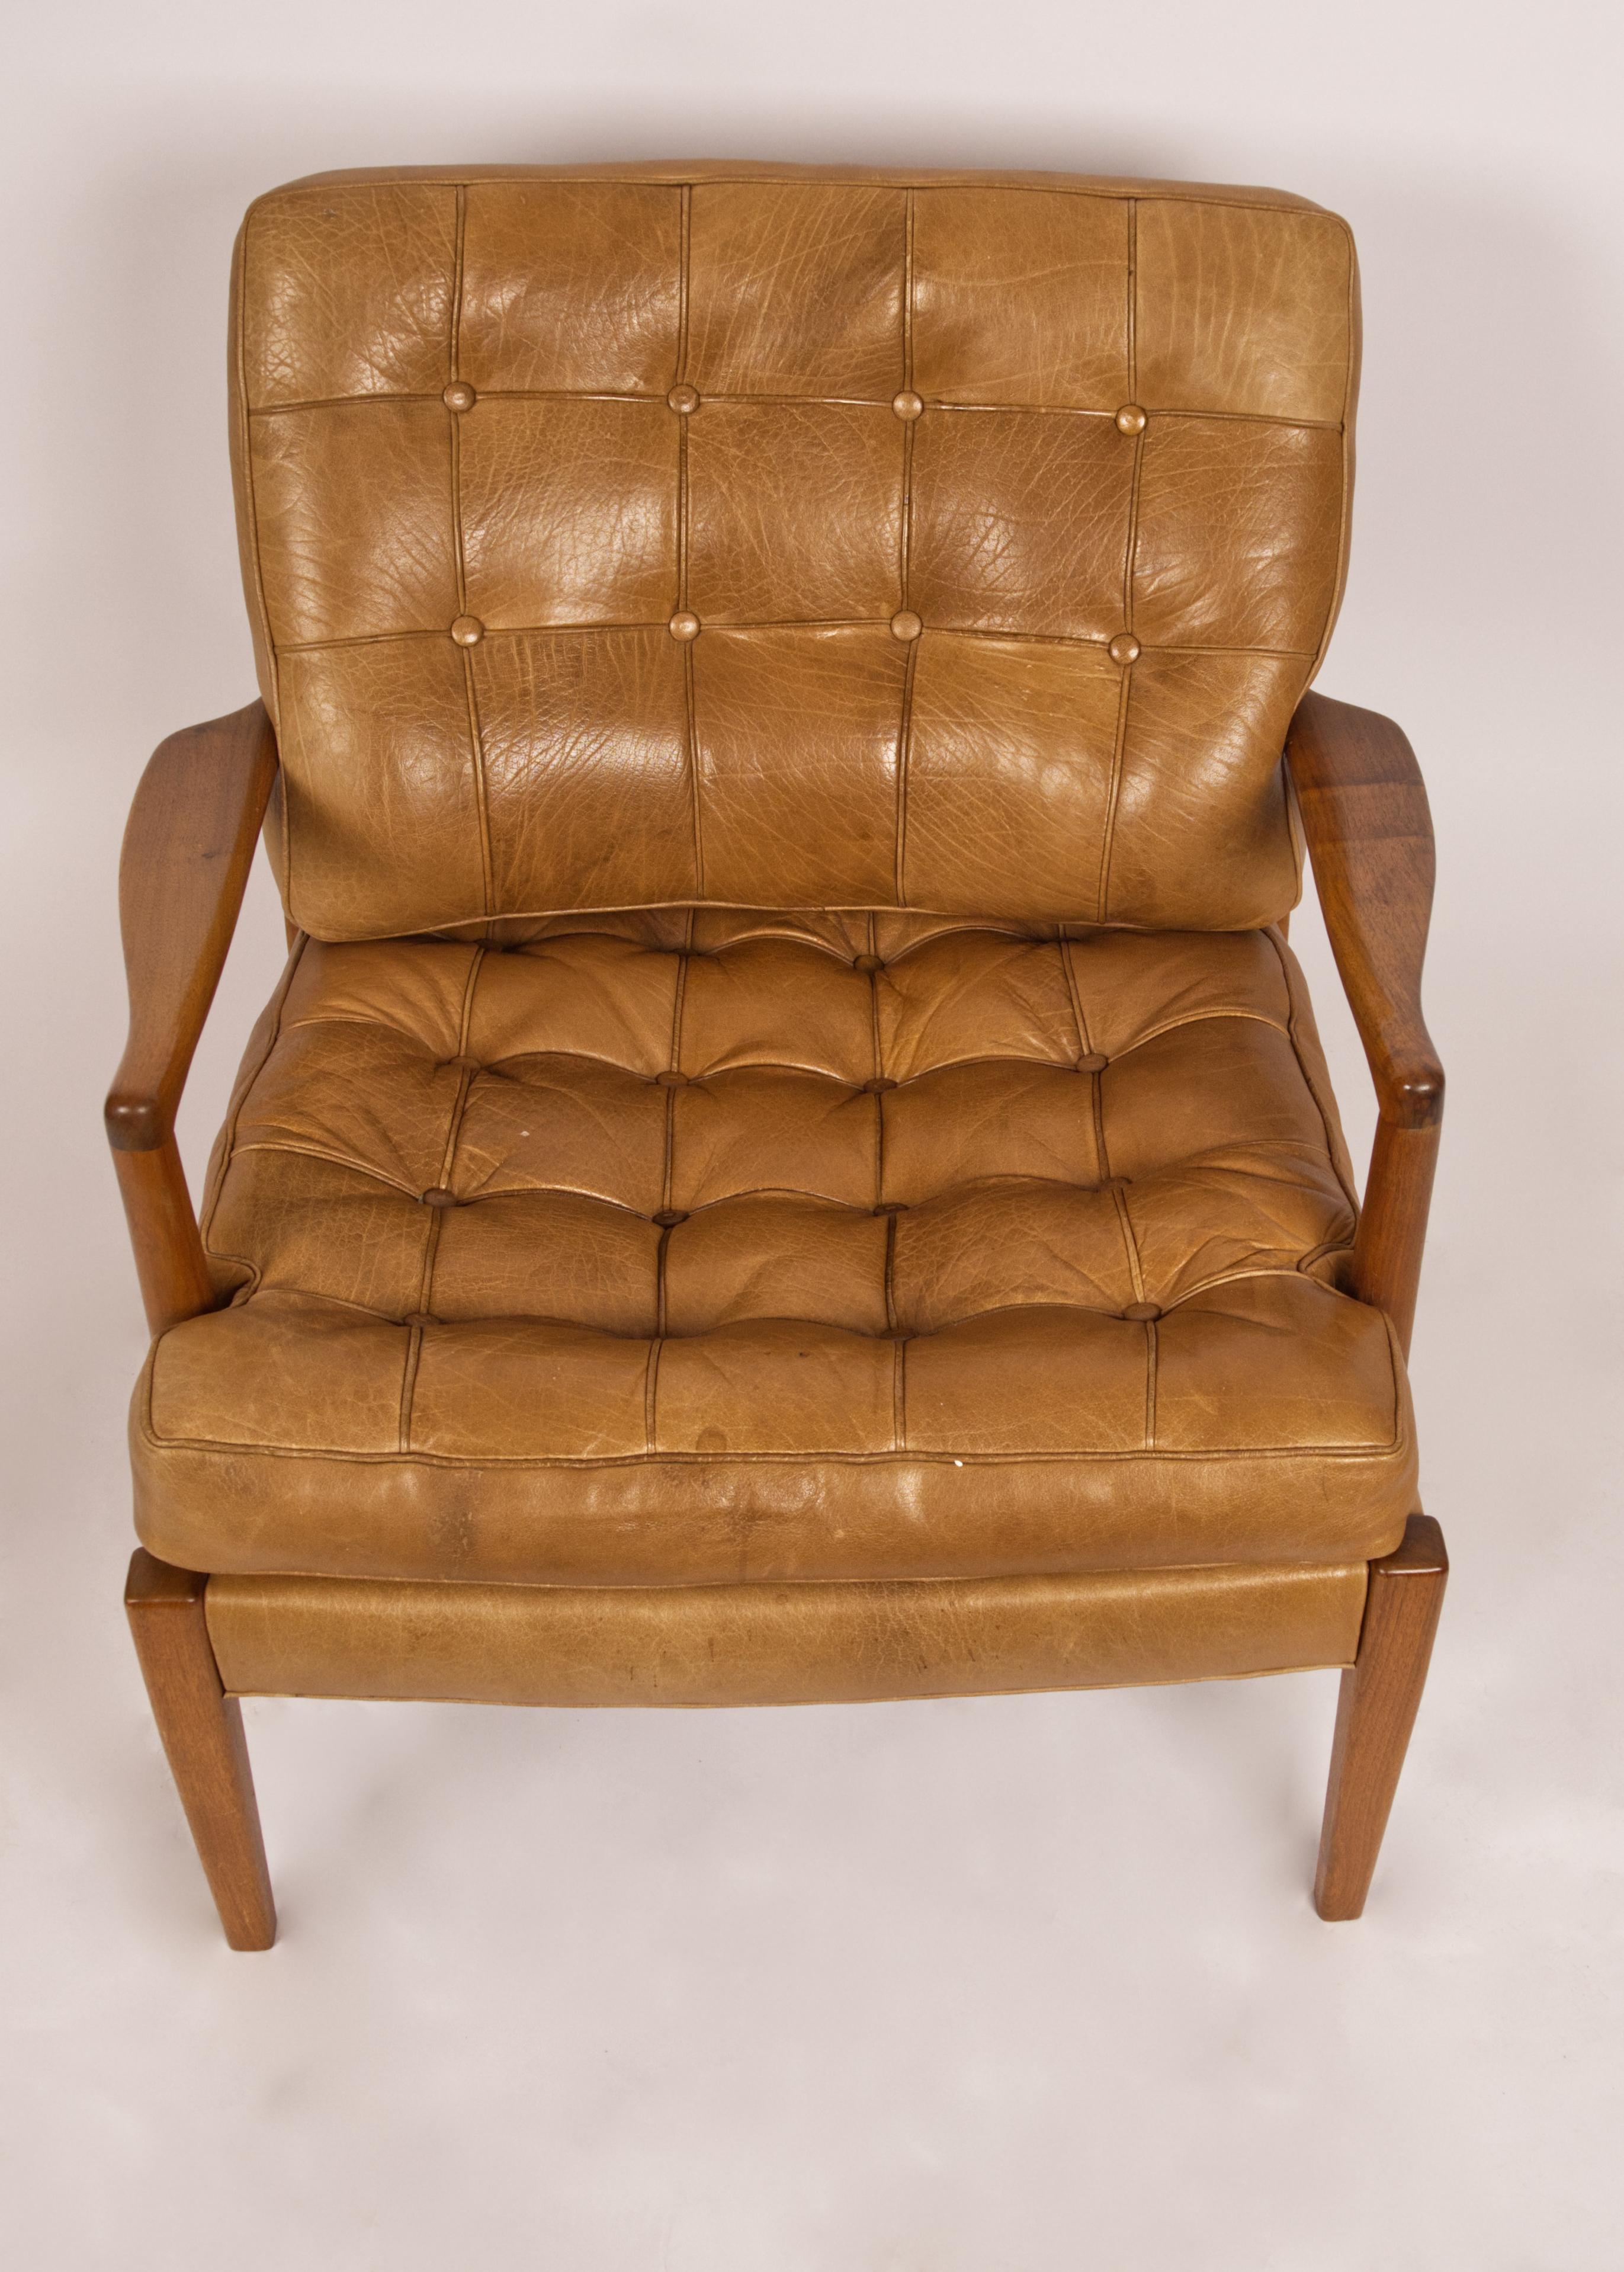 An Orche leather armchair named 